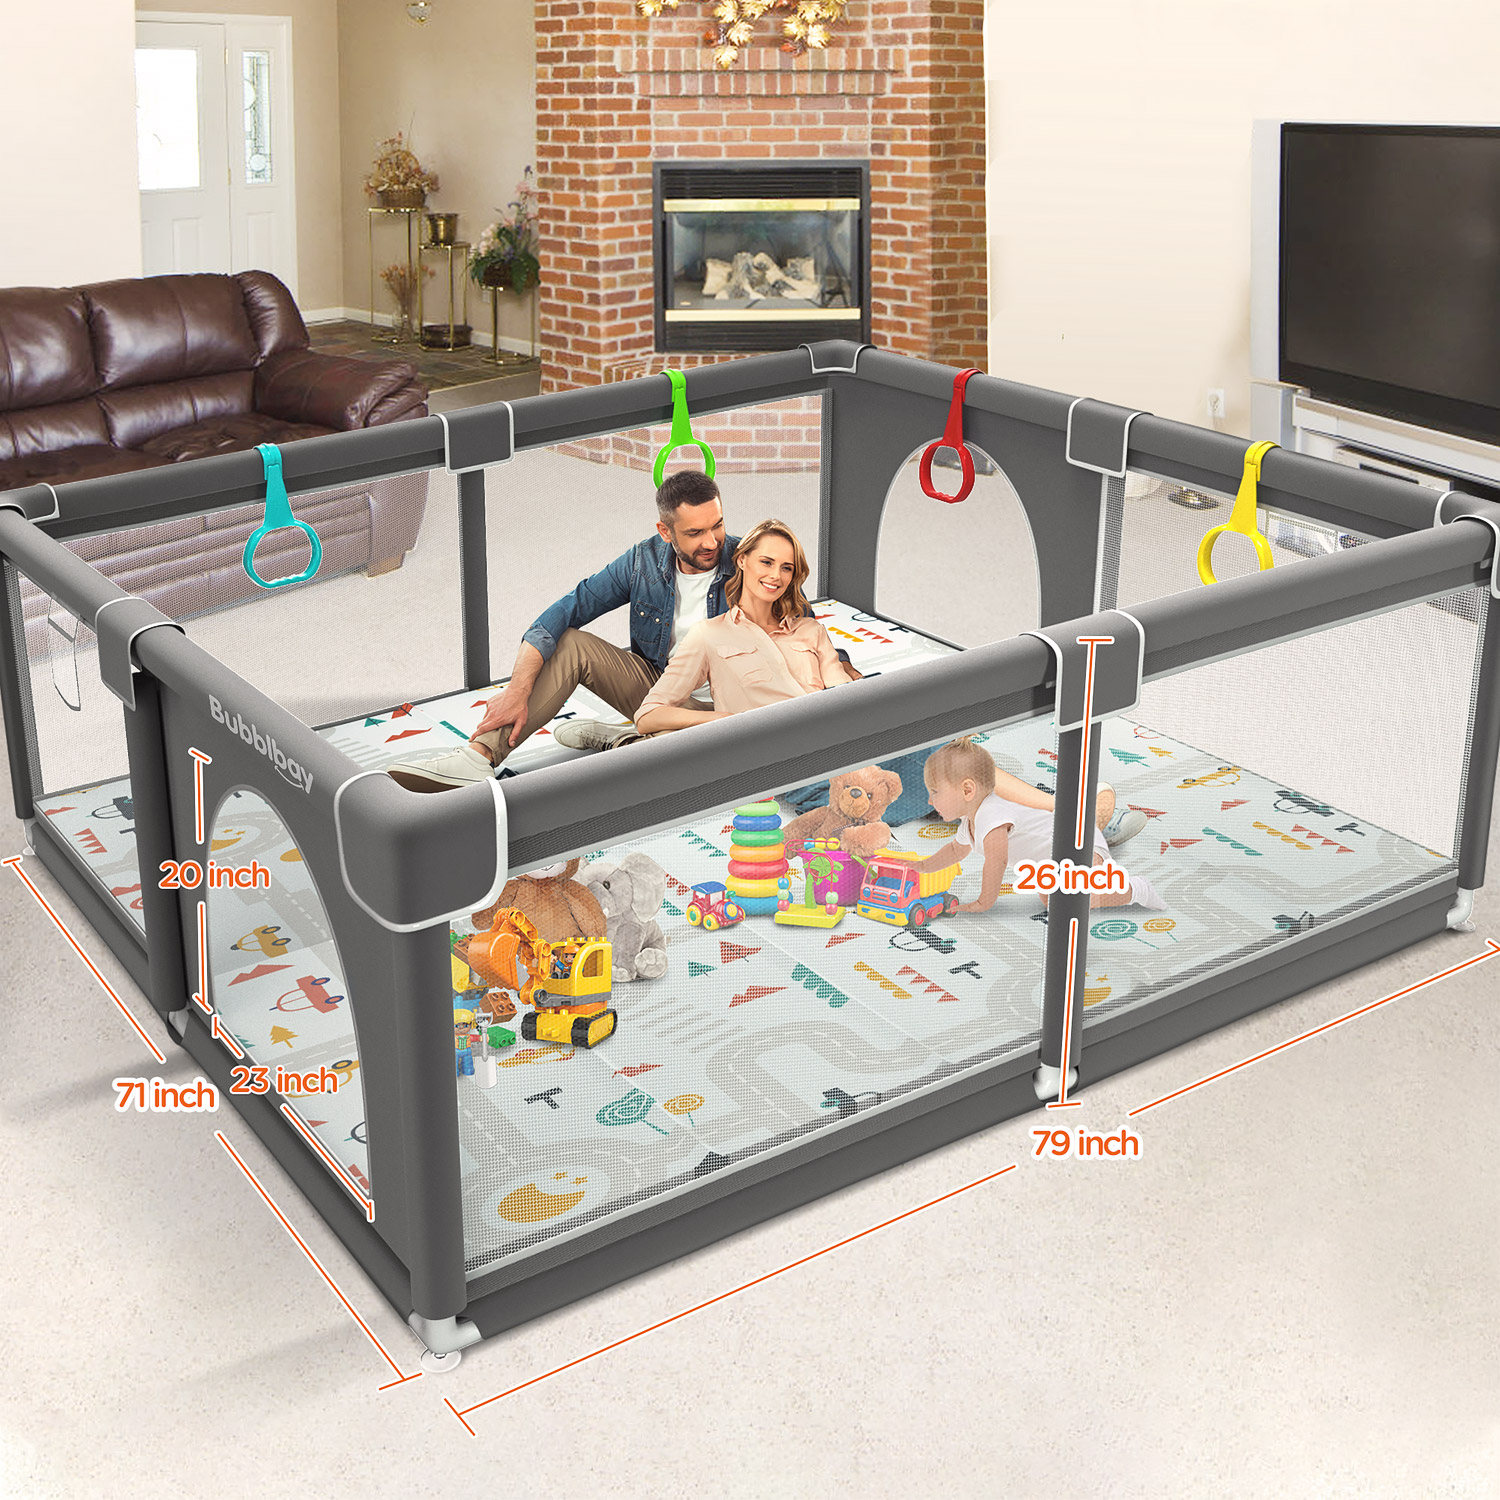 Campmoy Baby Playpen, 79x71", Indoor & Outdoor Kids Activity Play Yard with Gate - image 2 of 7